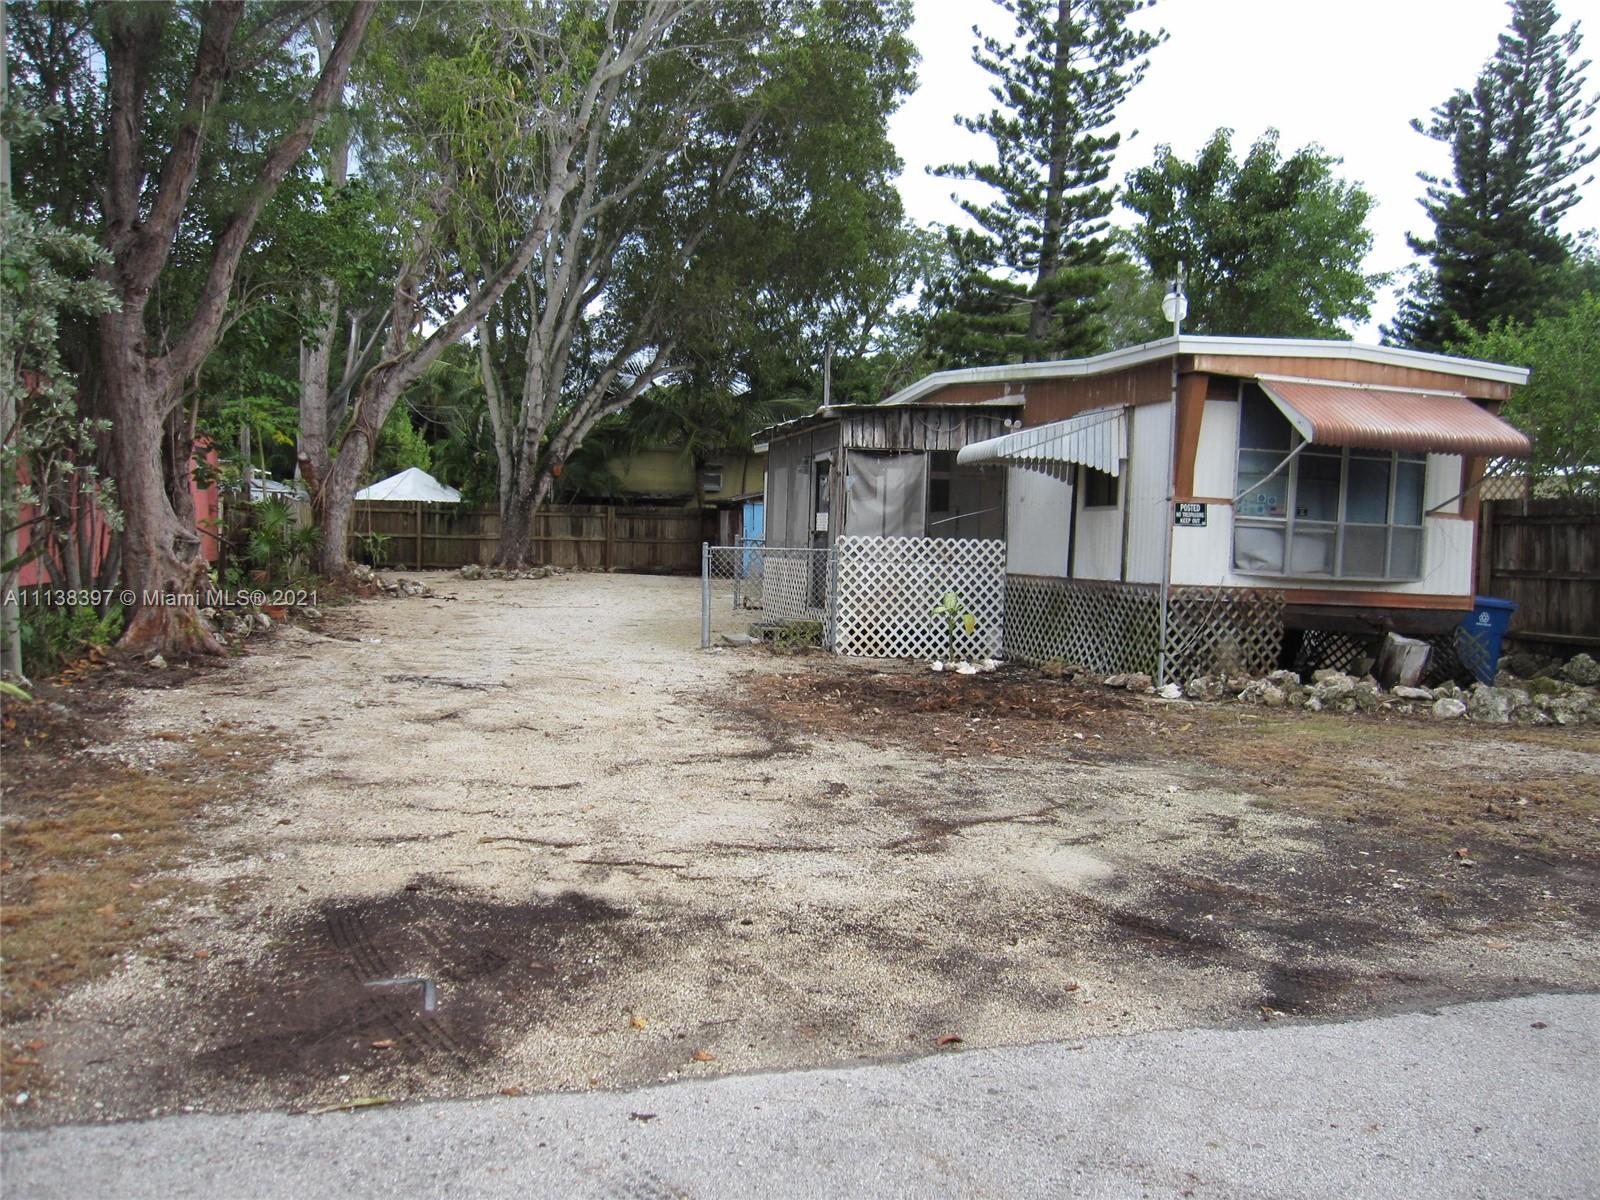 This is a single wide mobile home. 2/1, 720 sq/ft. on a spacious and obstruction free 50w x 102d Lot. (5141 sq/ft). Home is livable but could use some TLC or remove and build your dream home. Rogo applied for and should be received in January 2022. Great location in front of a National Preserve and within a casual walk to the popular National State Park of Harry Harris with boat ramps, picnic areas, beach, playground, baseball field, basketball, fun place. Plantation Key Schools and Coral High School just 3 miles close. This could be one of the rarest and cheapest investment opportunities still available in the keys. NO HOA.  No restrictions! Store your RV or boat. Come and enjoy a piece of paradise.  Land conveys with purchase! Call listing agent today!